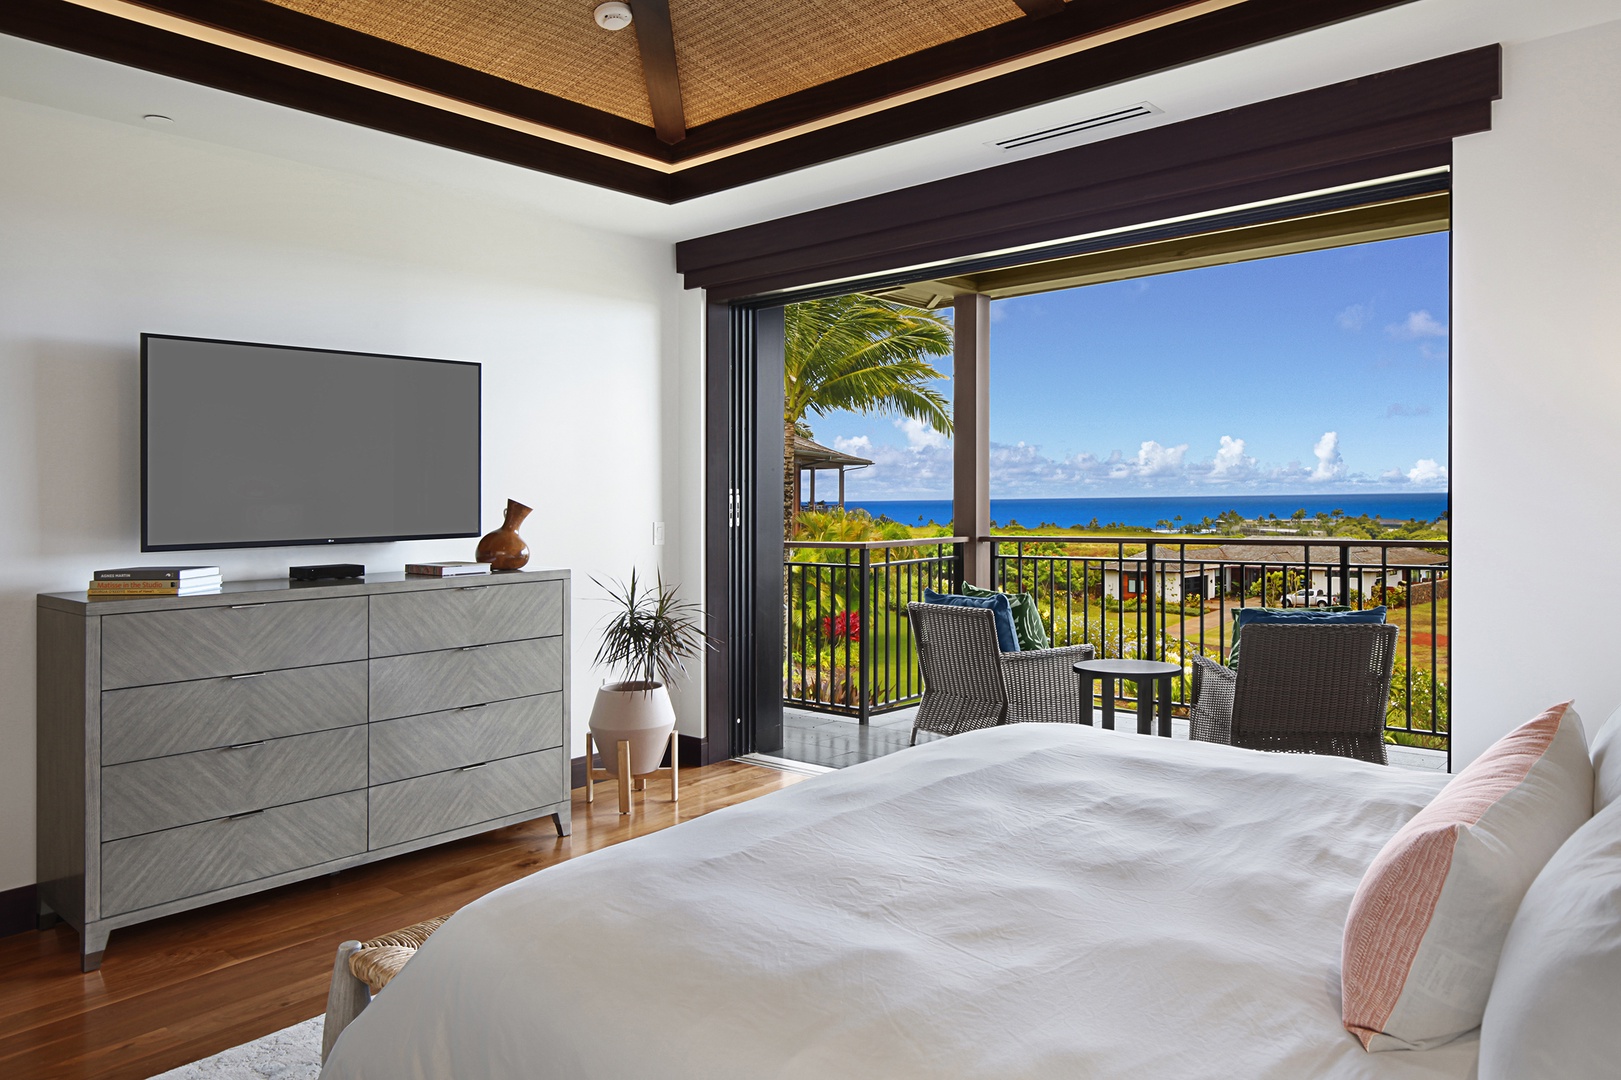 Koloa Vacation Rentals, Kukui'ula Villa #8 - Each of the lovely bedrooms balances soothing earth tones, cool tile, and warm wood, for an utterly tranquil atmosphere